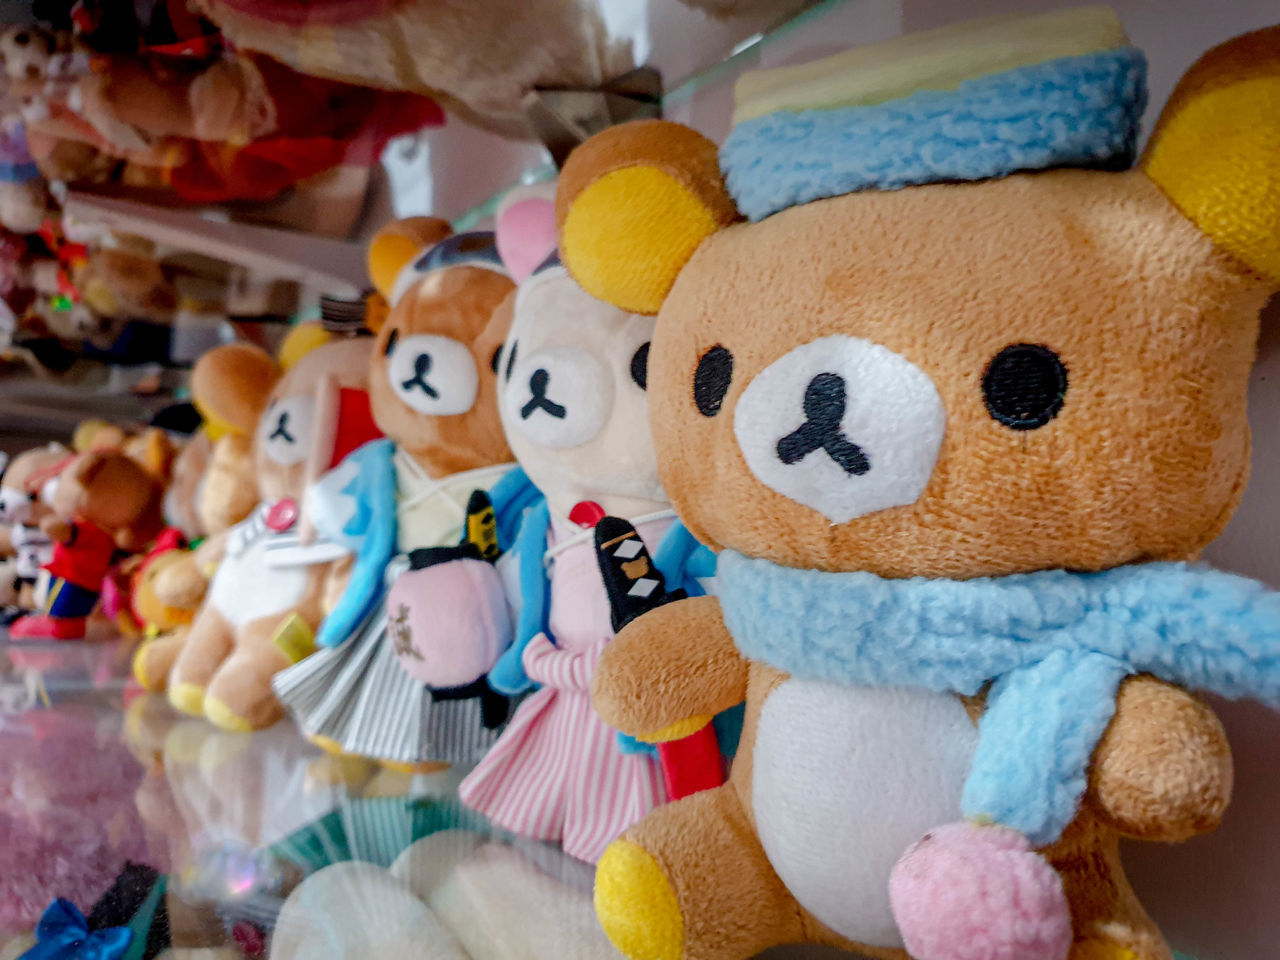 CLOSE-UP OF STUFFED TOY